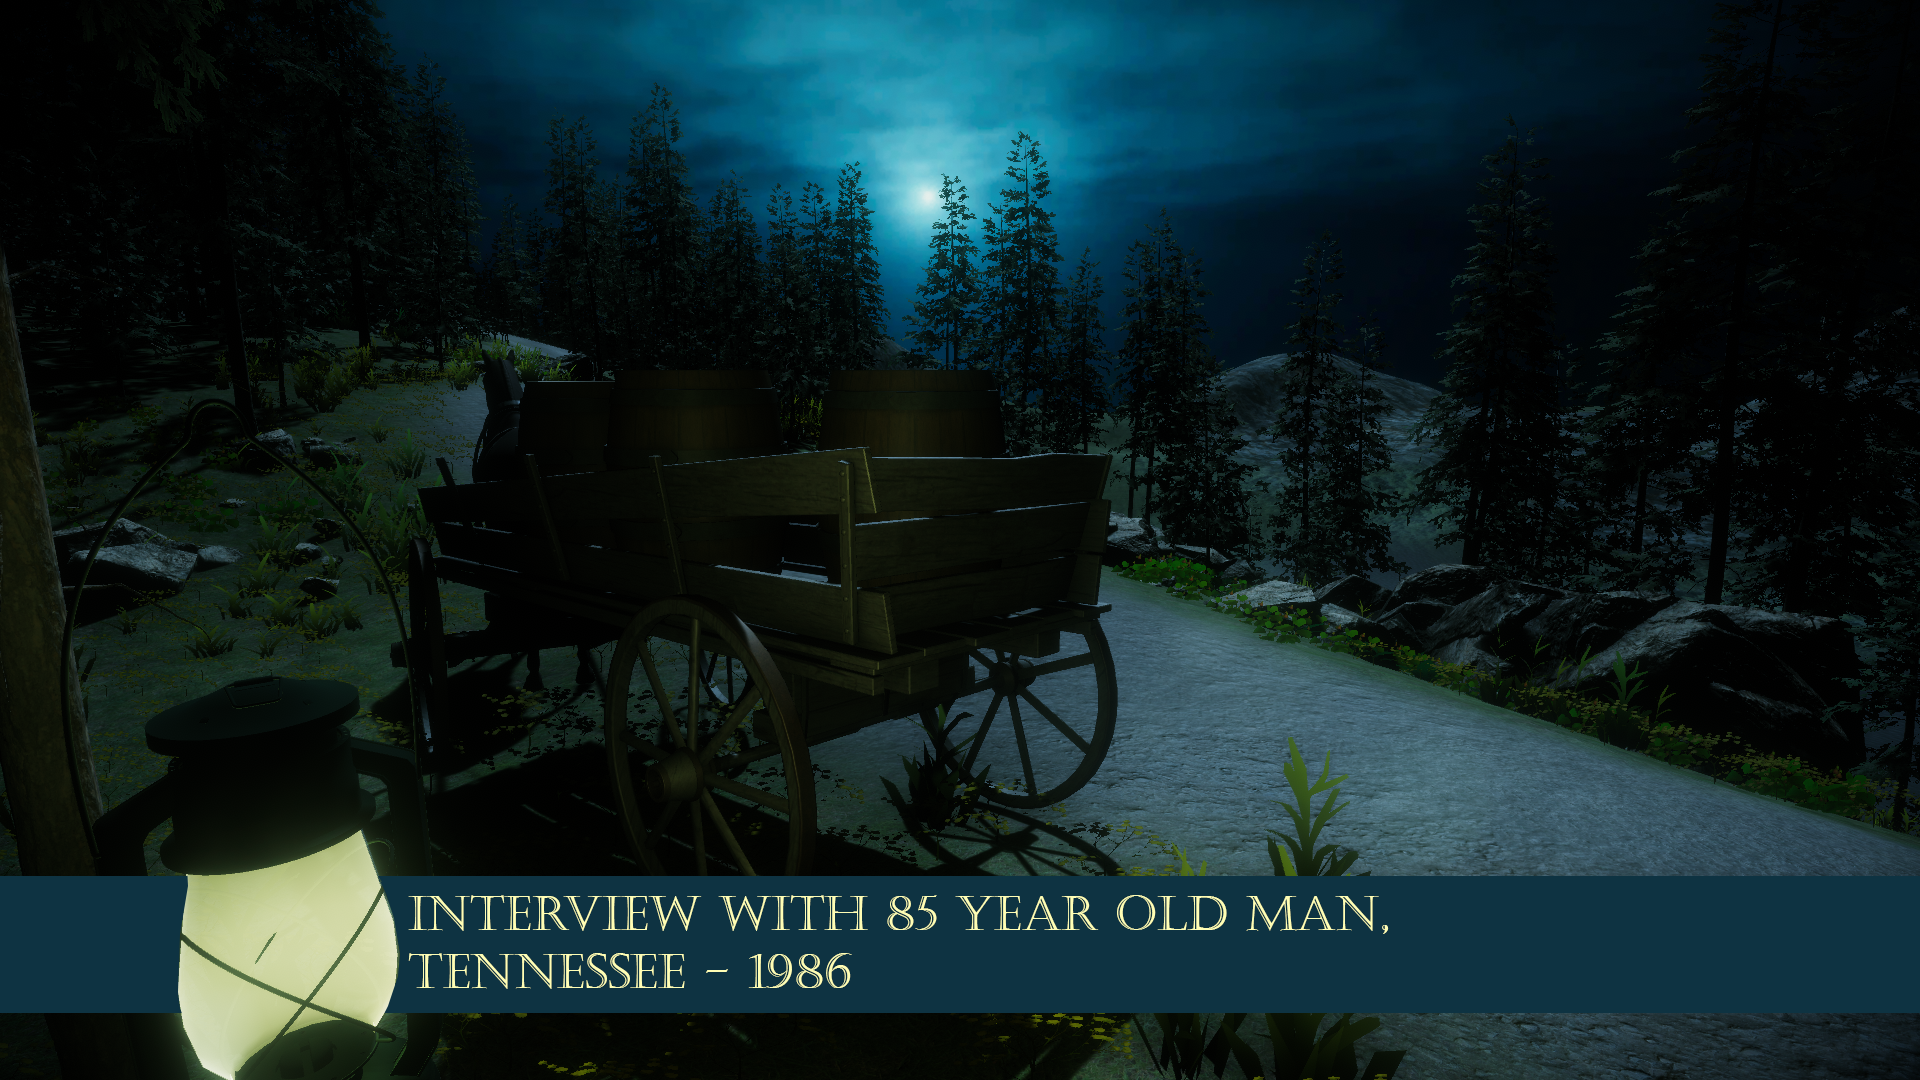 Interview with 85 year old male, Tennessee - 1986